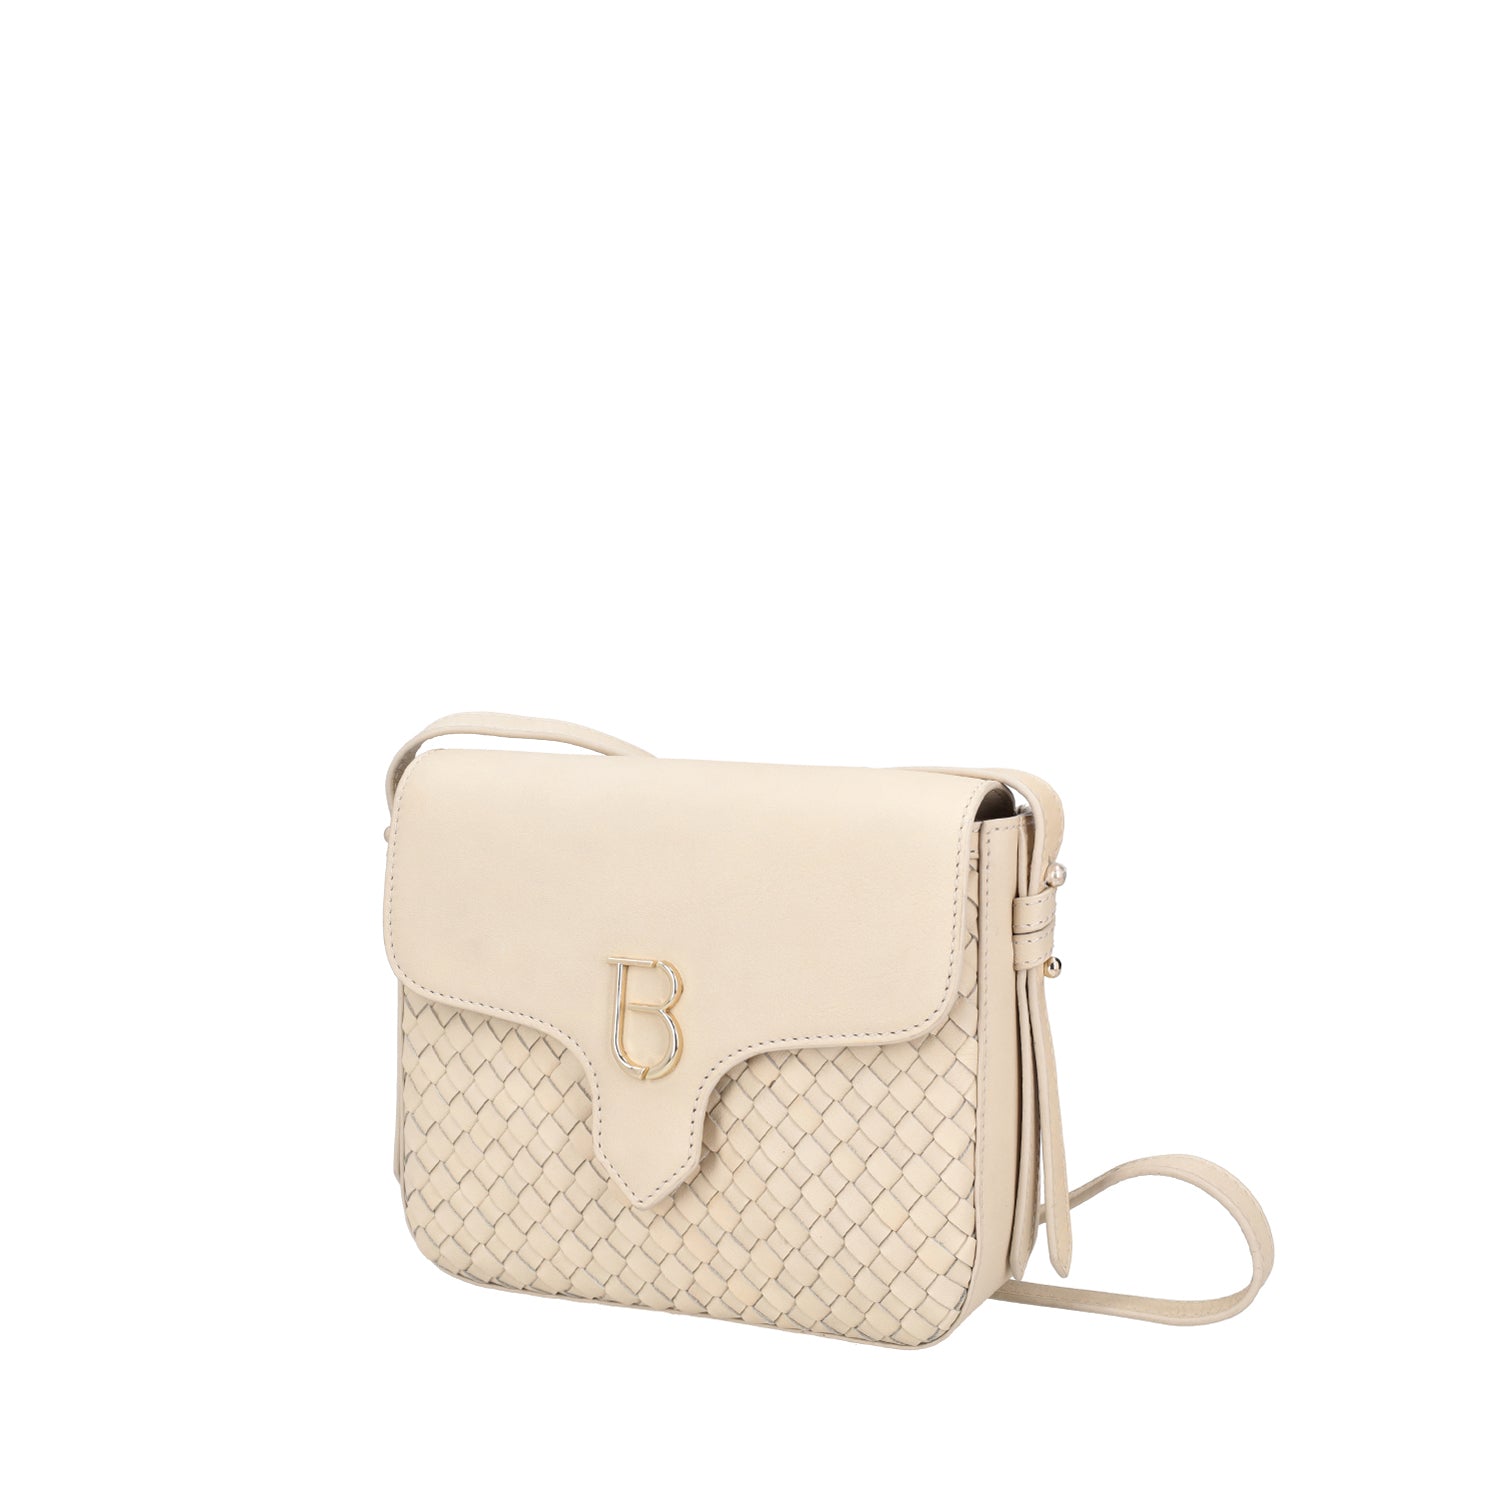 NATURAL FRESIA CROSSBODY BAG IN WOVEN LEATHER